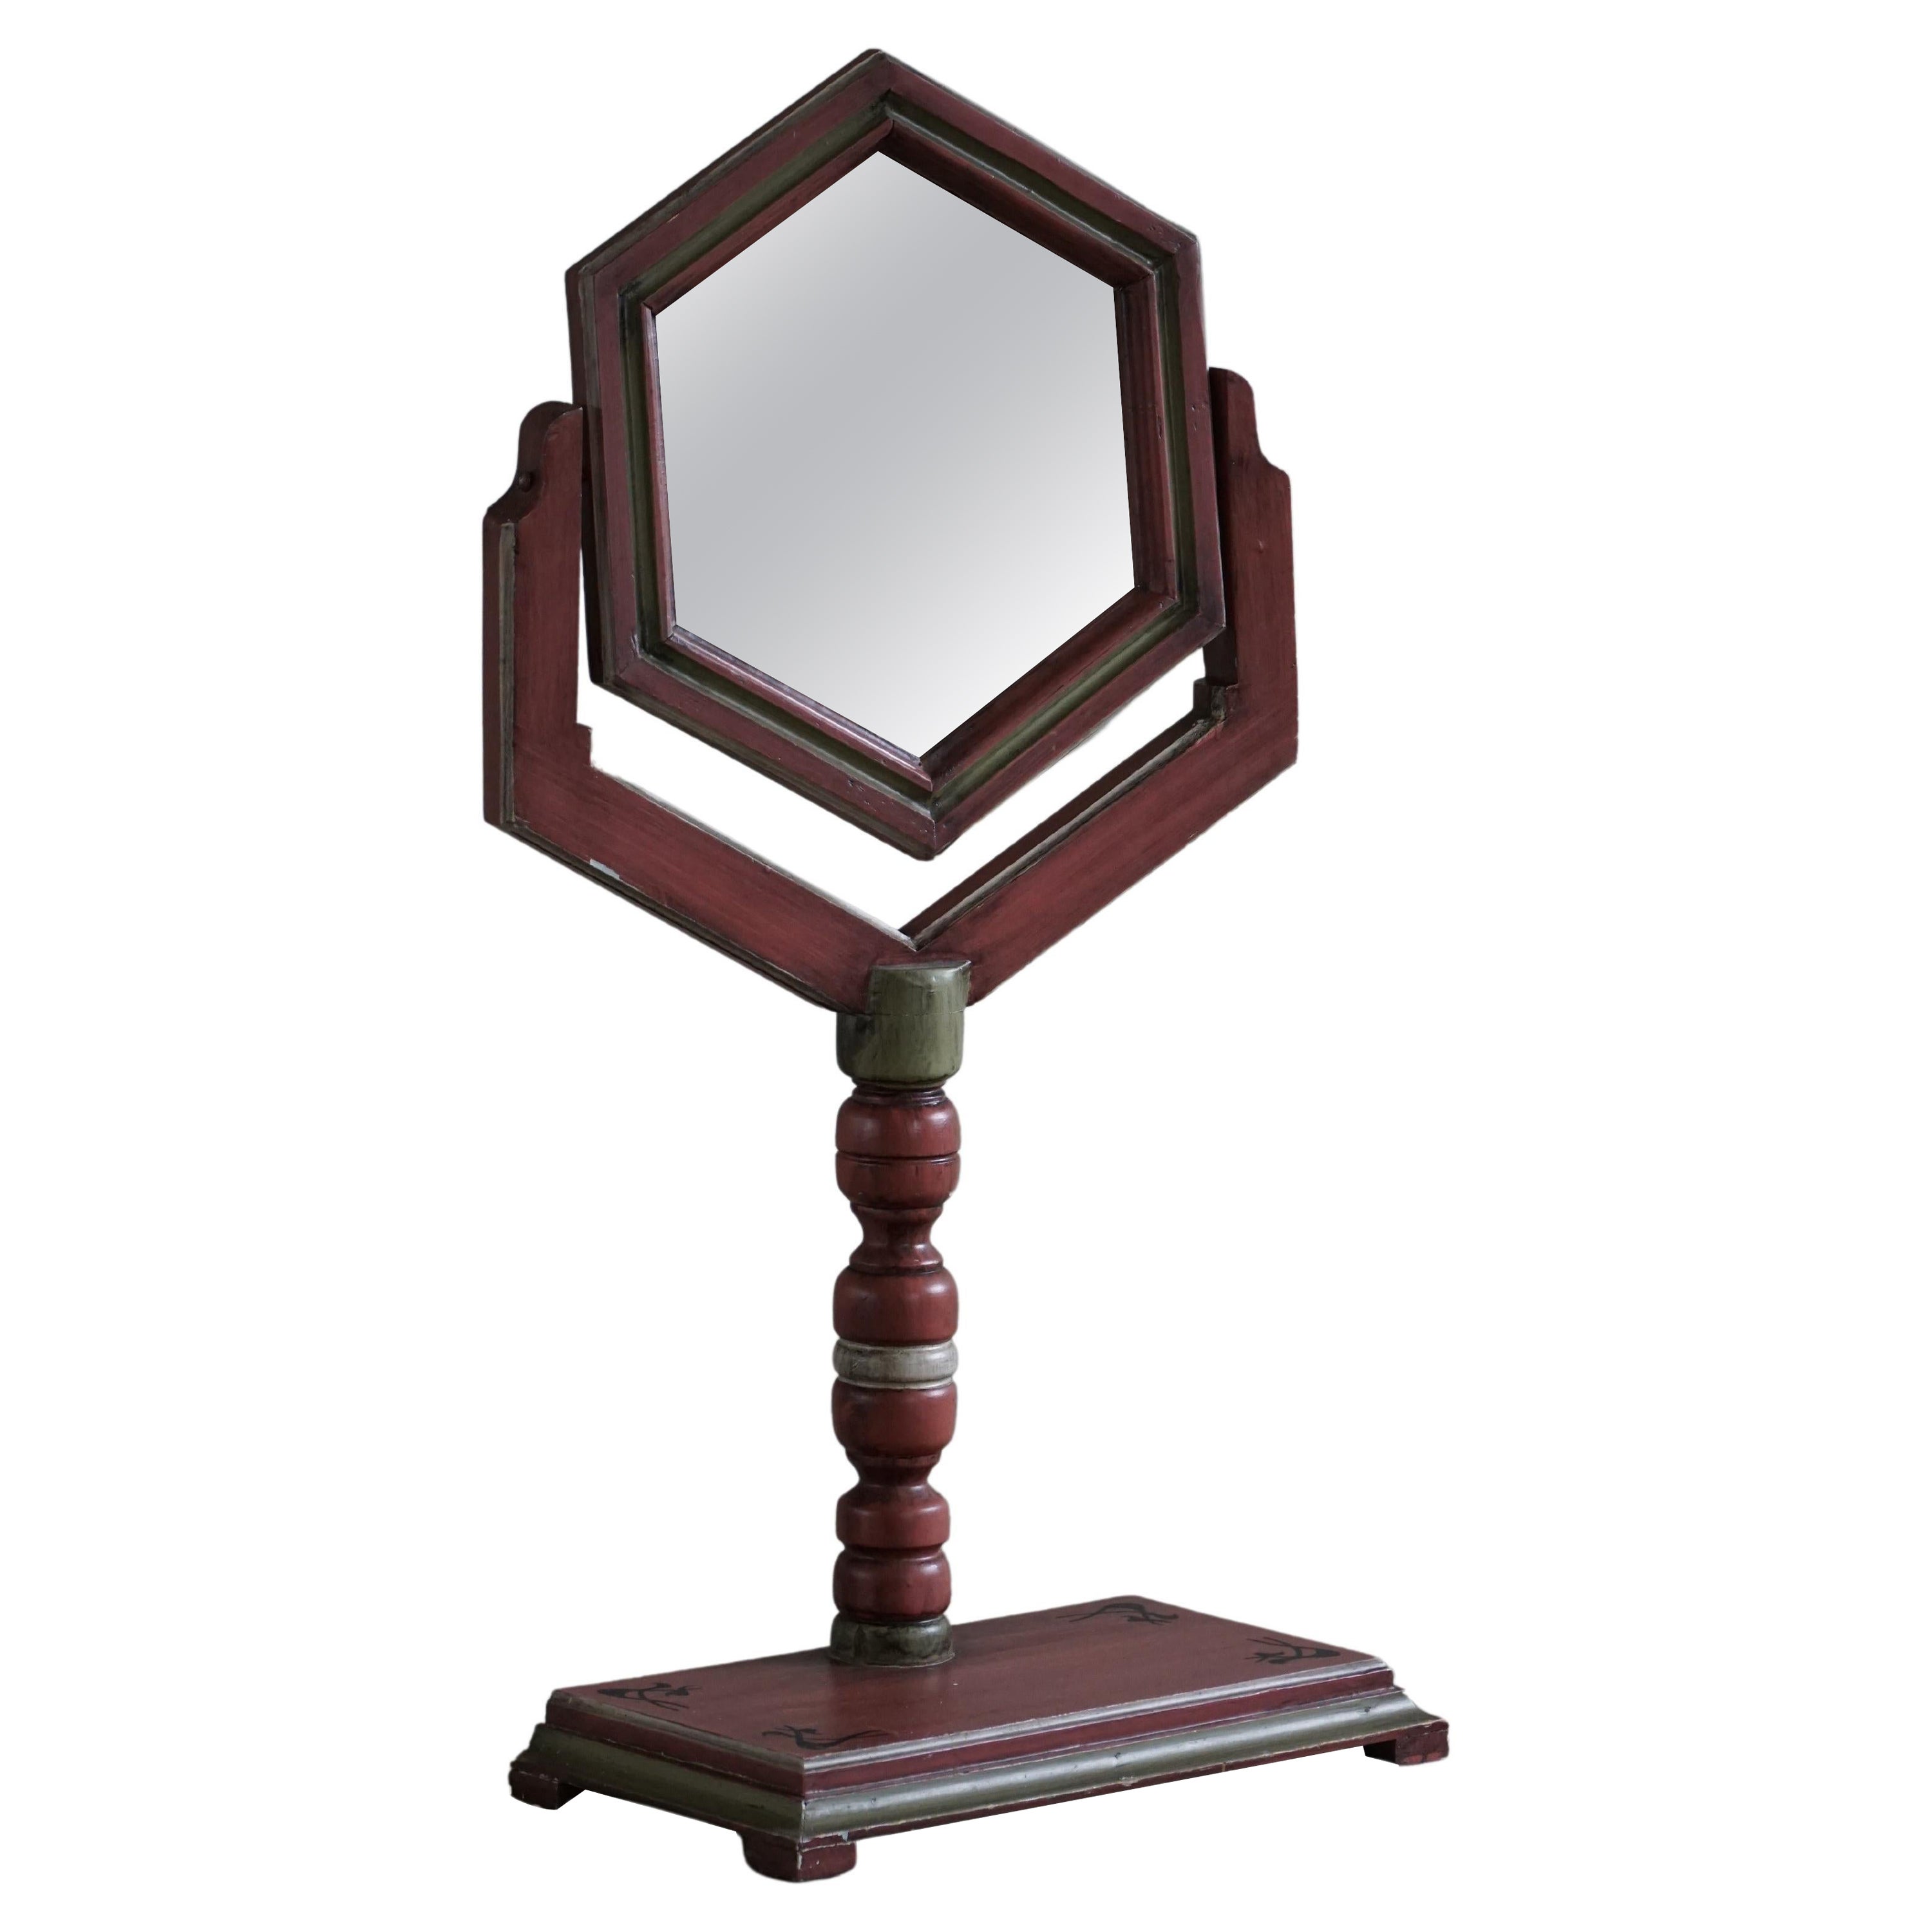 A Table Mirror in Pine by a Swedish Cabinetmaker, Folk Art, Early 20th Century For Sale